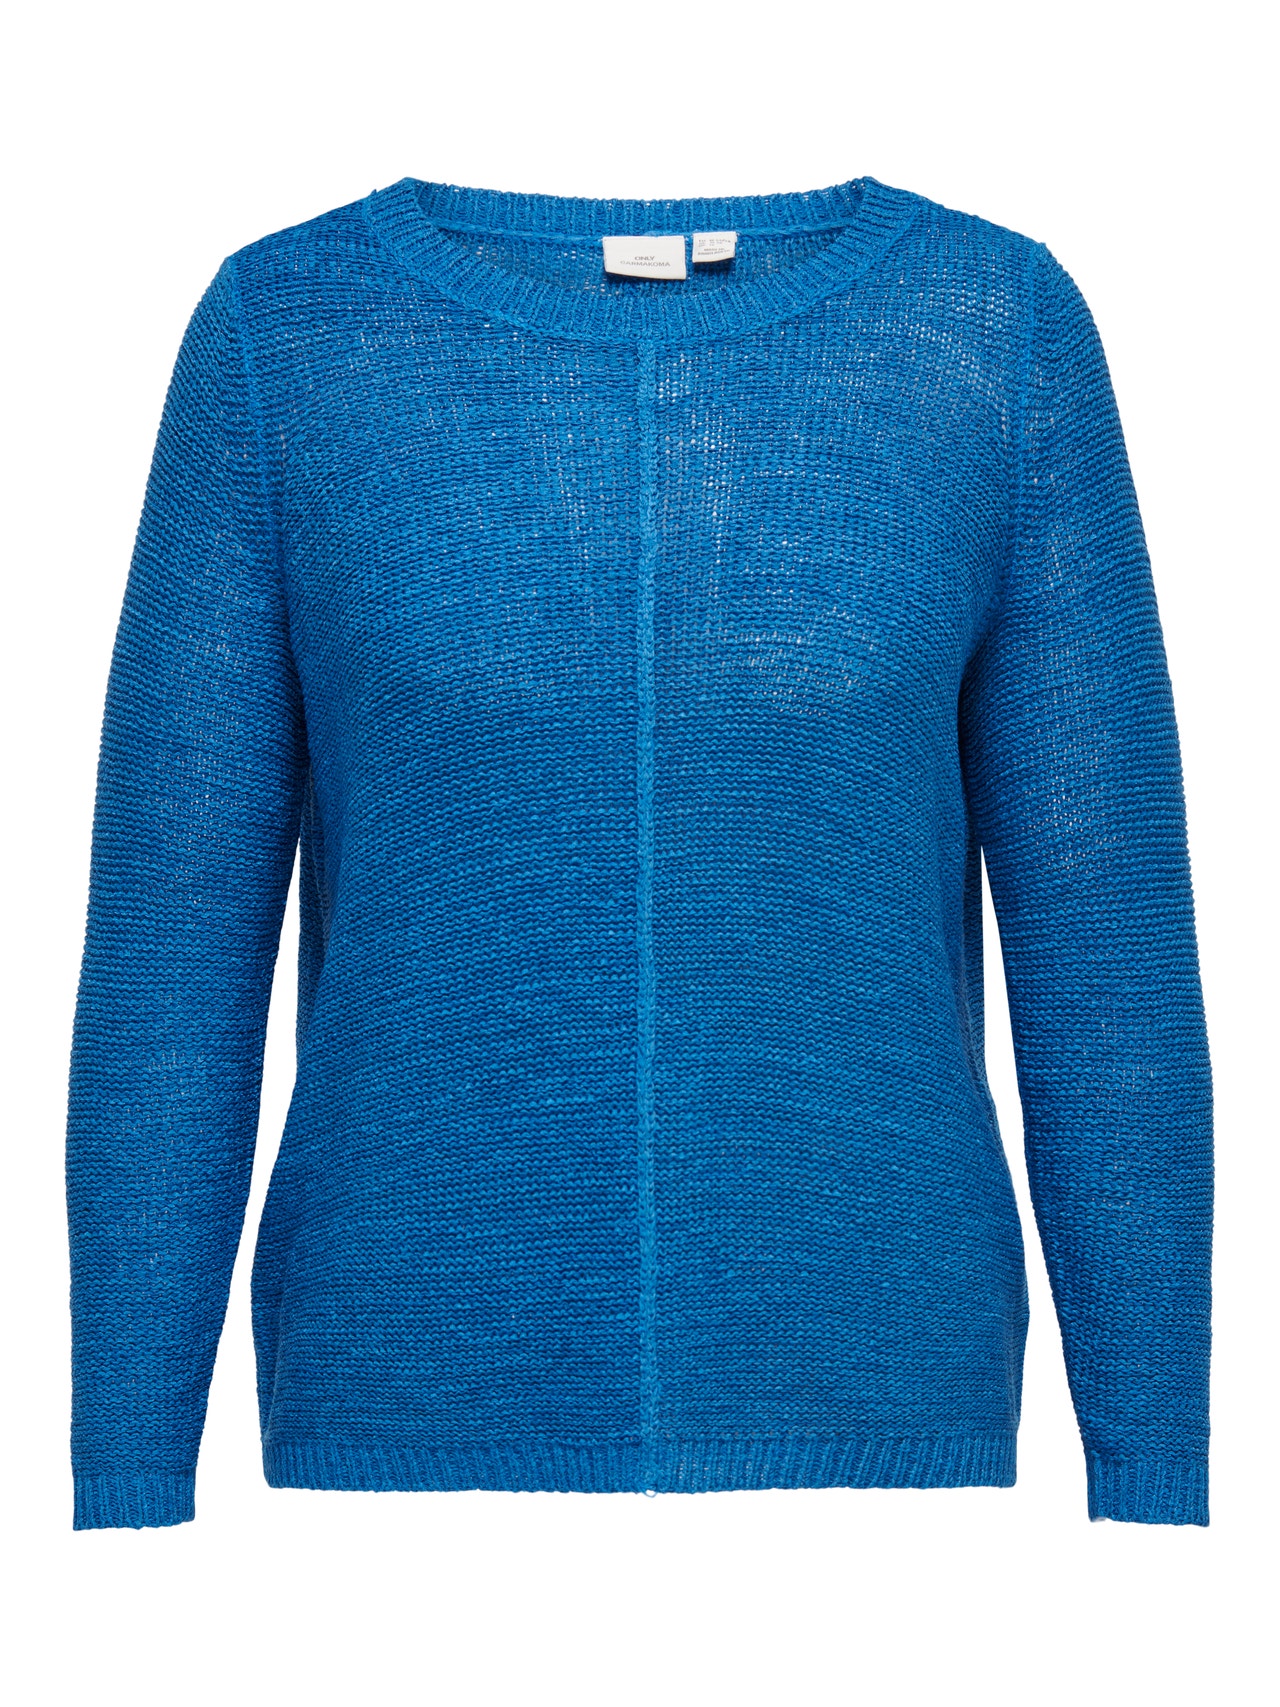 ONLY Curvy texture Knitted Pullover -Directoire Blue - 15194438